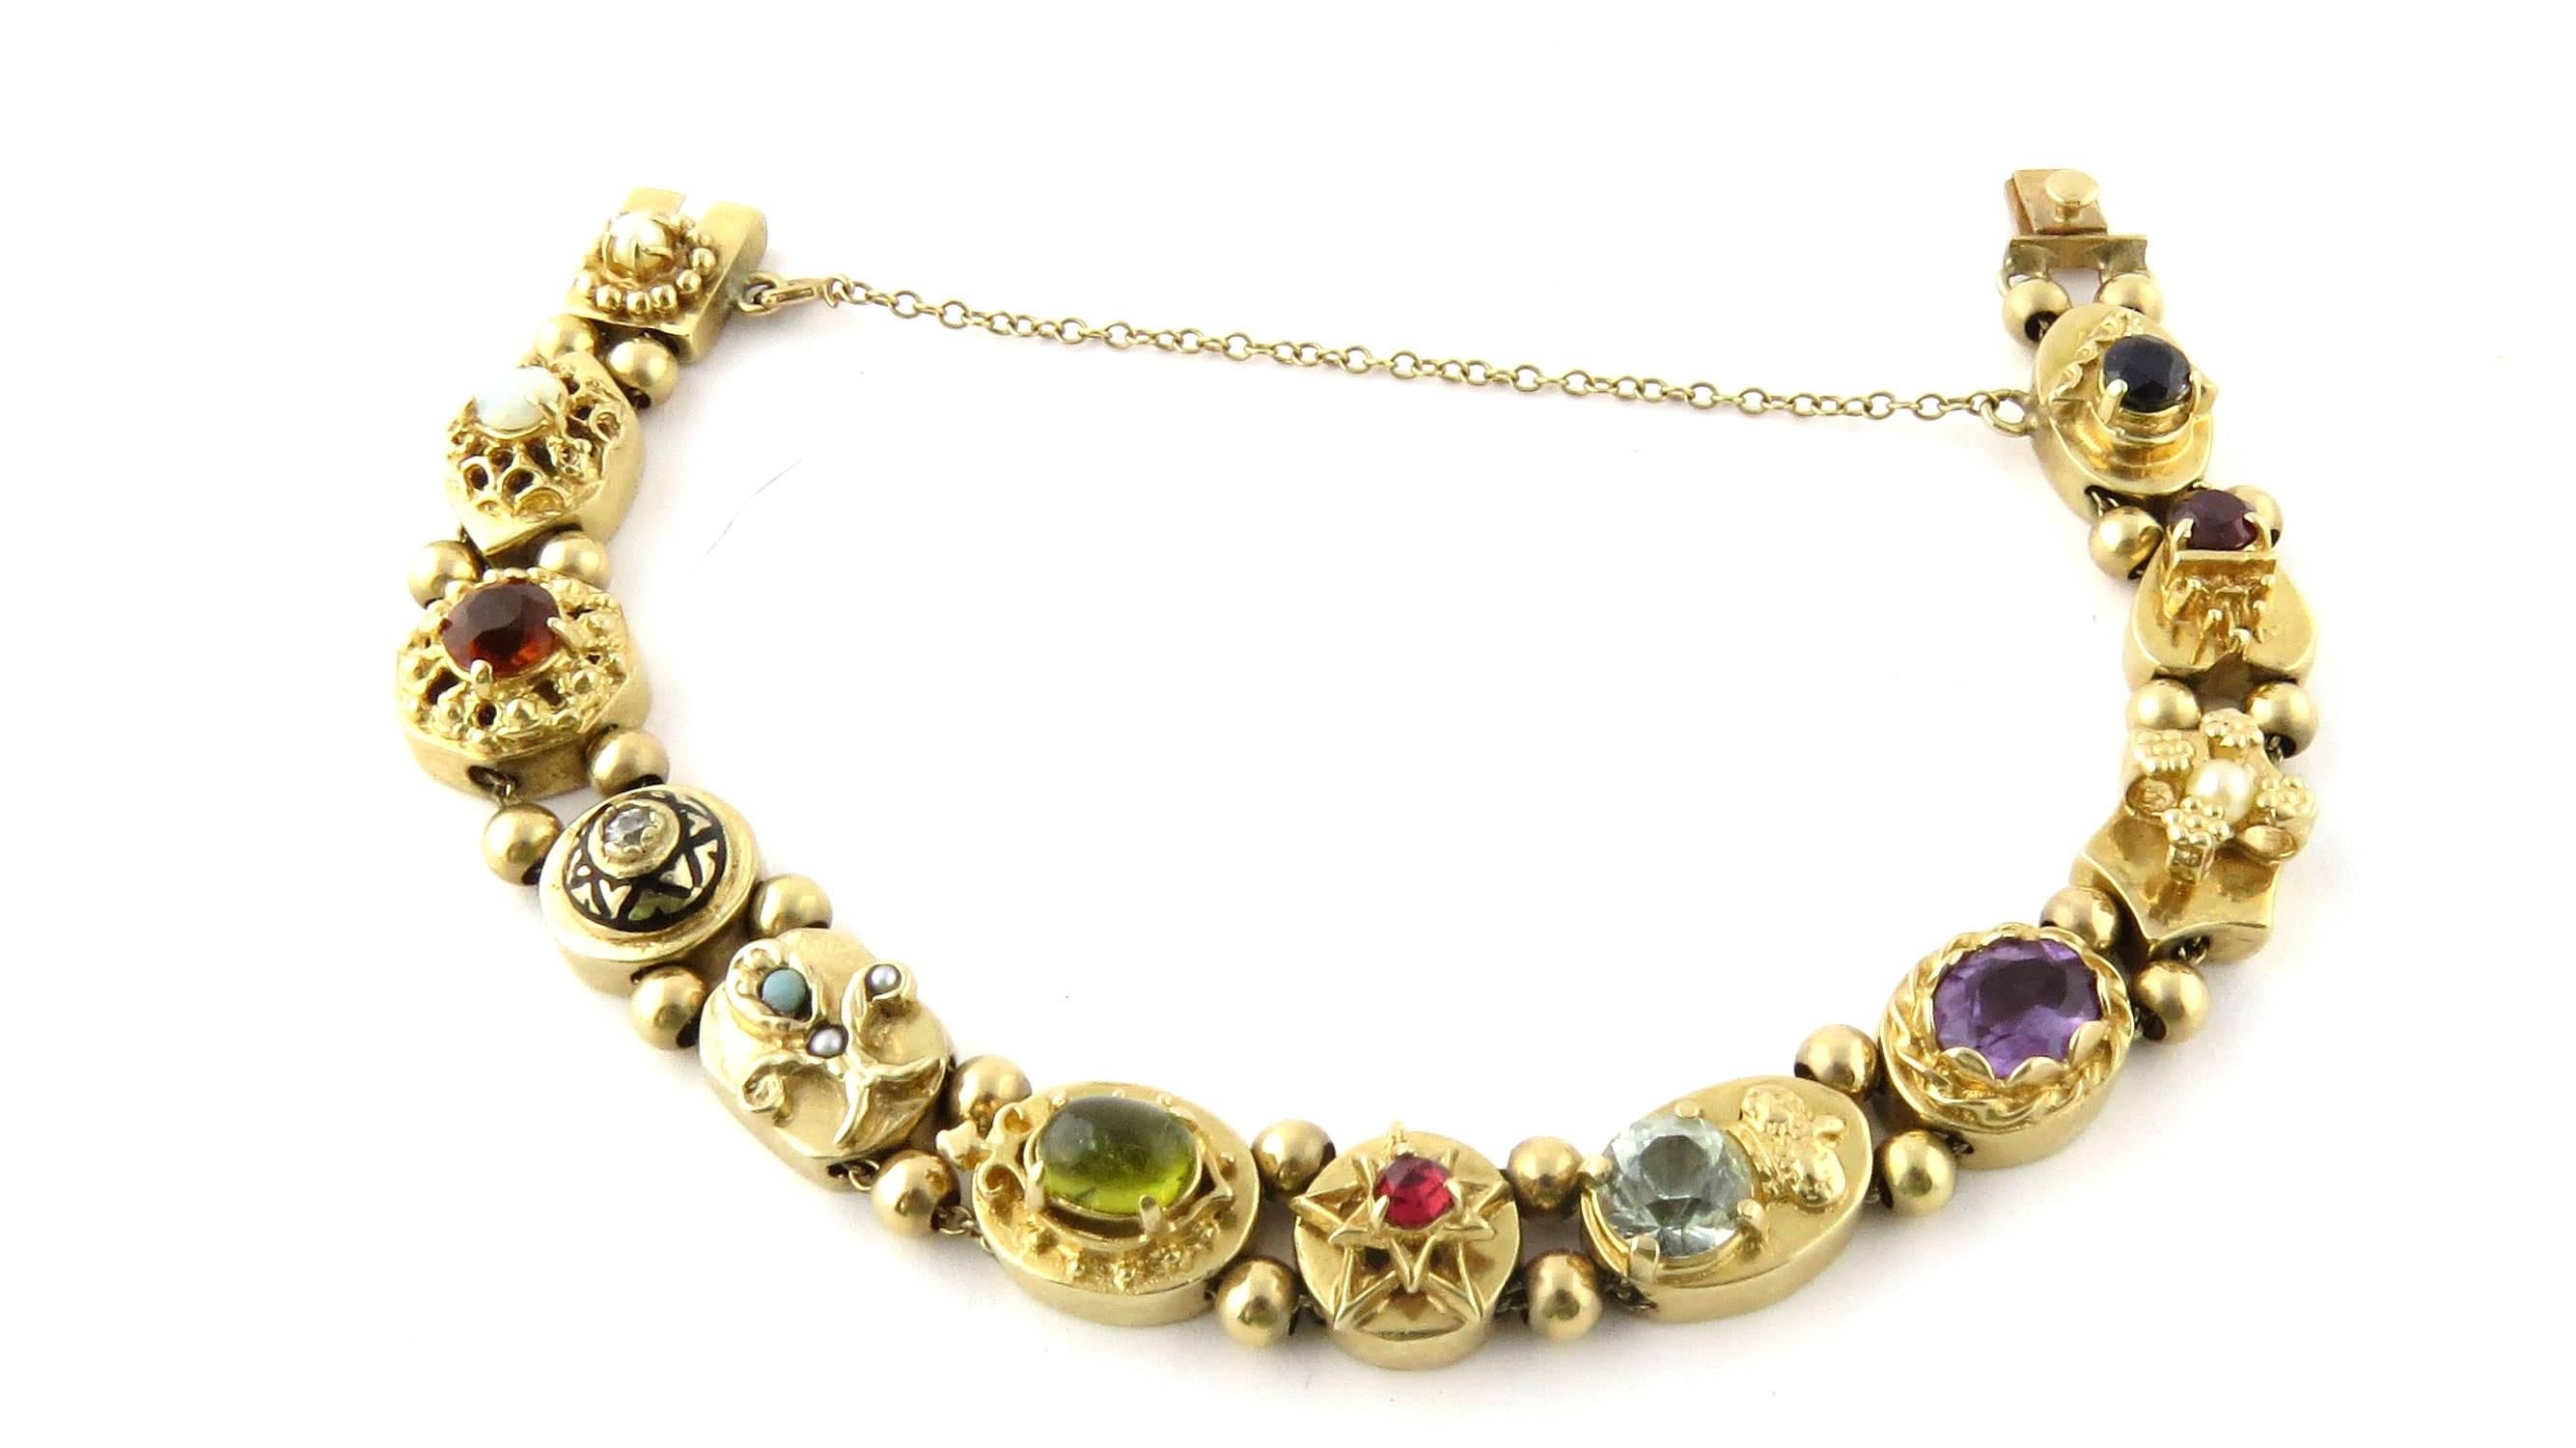 Vintage 14K Yellow Gold Slide Charm Bracelet with Multiple Gemstones and Diamonds Will fit up to a 7